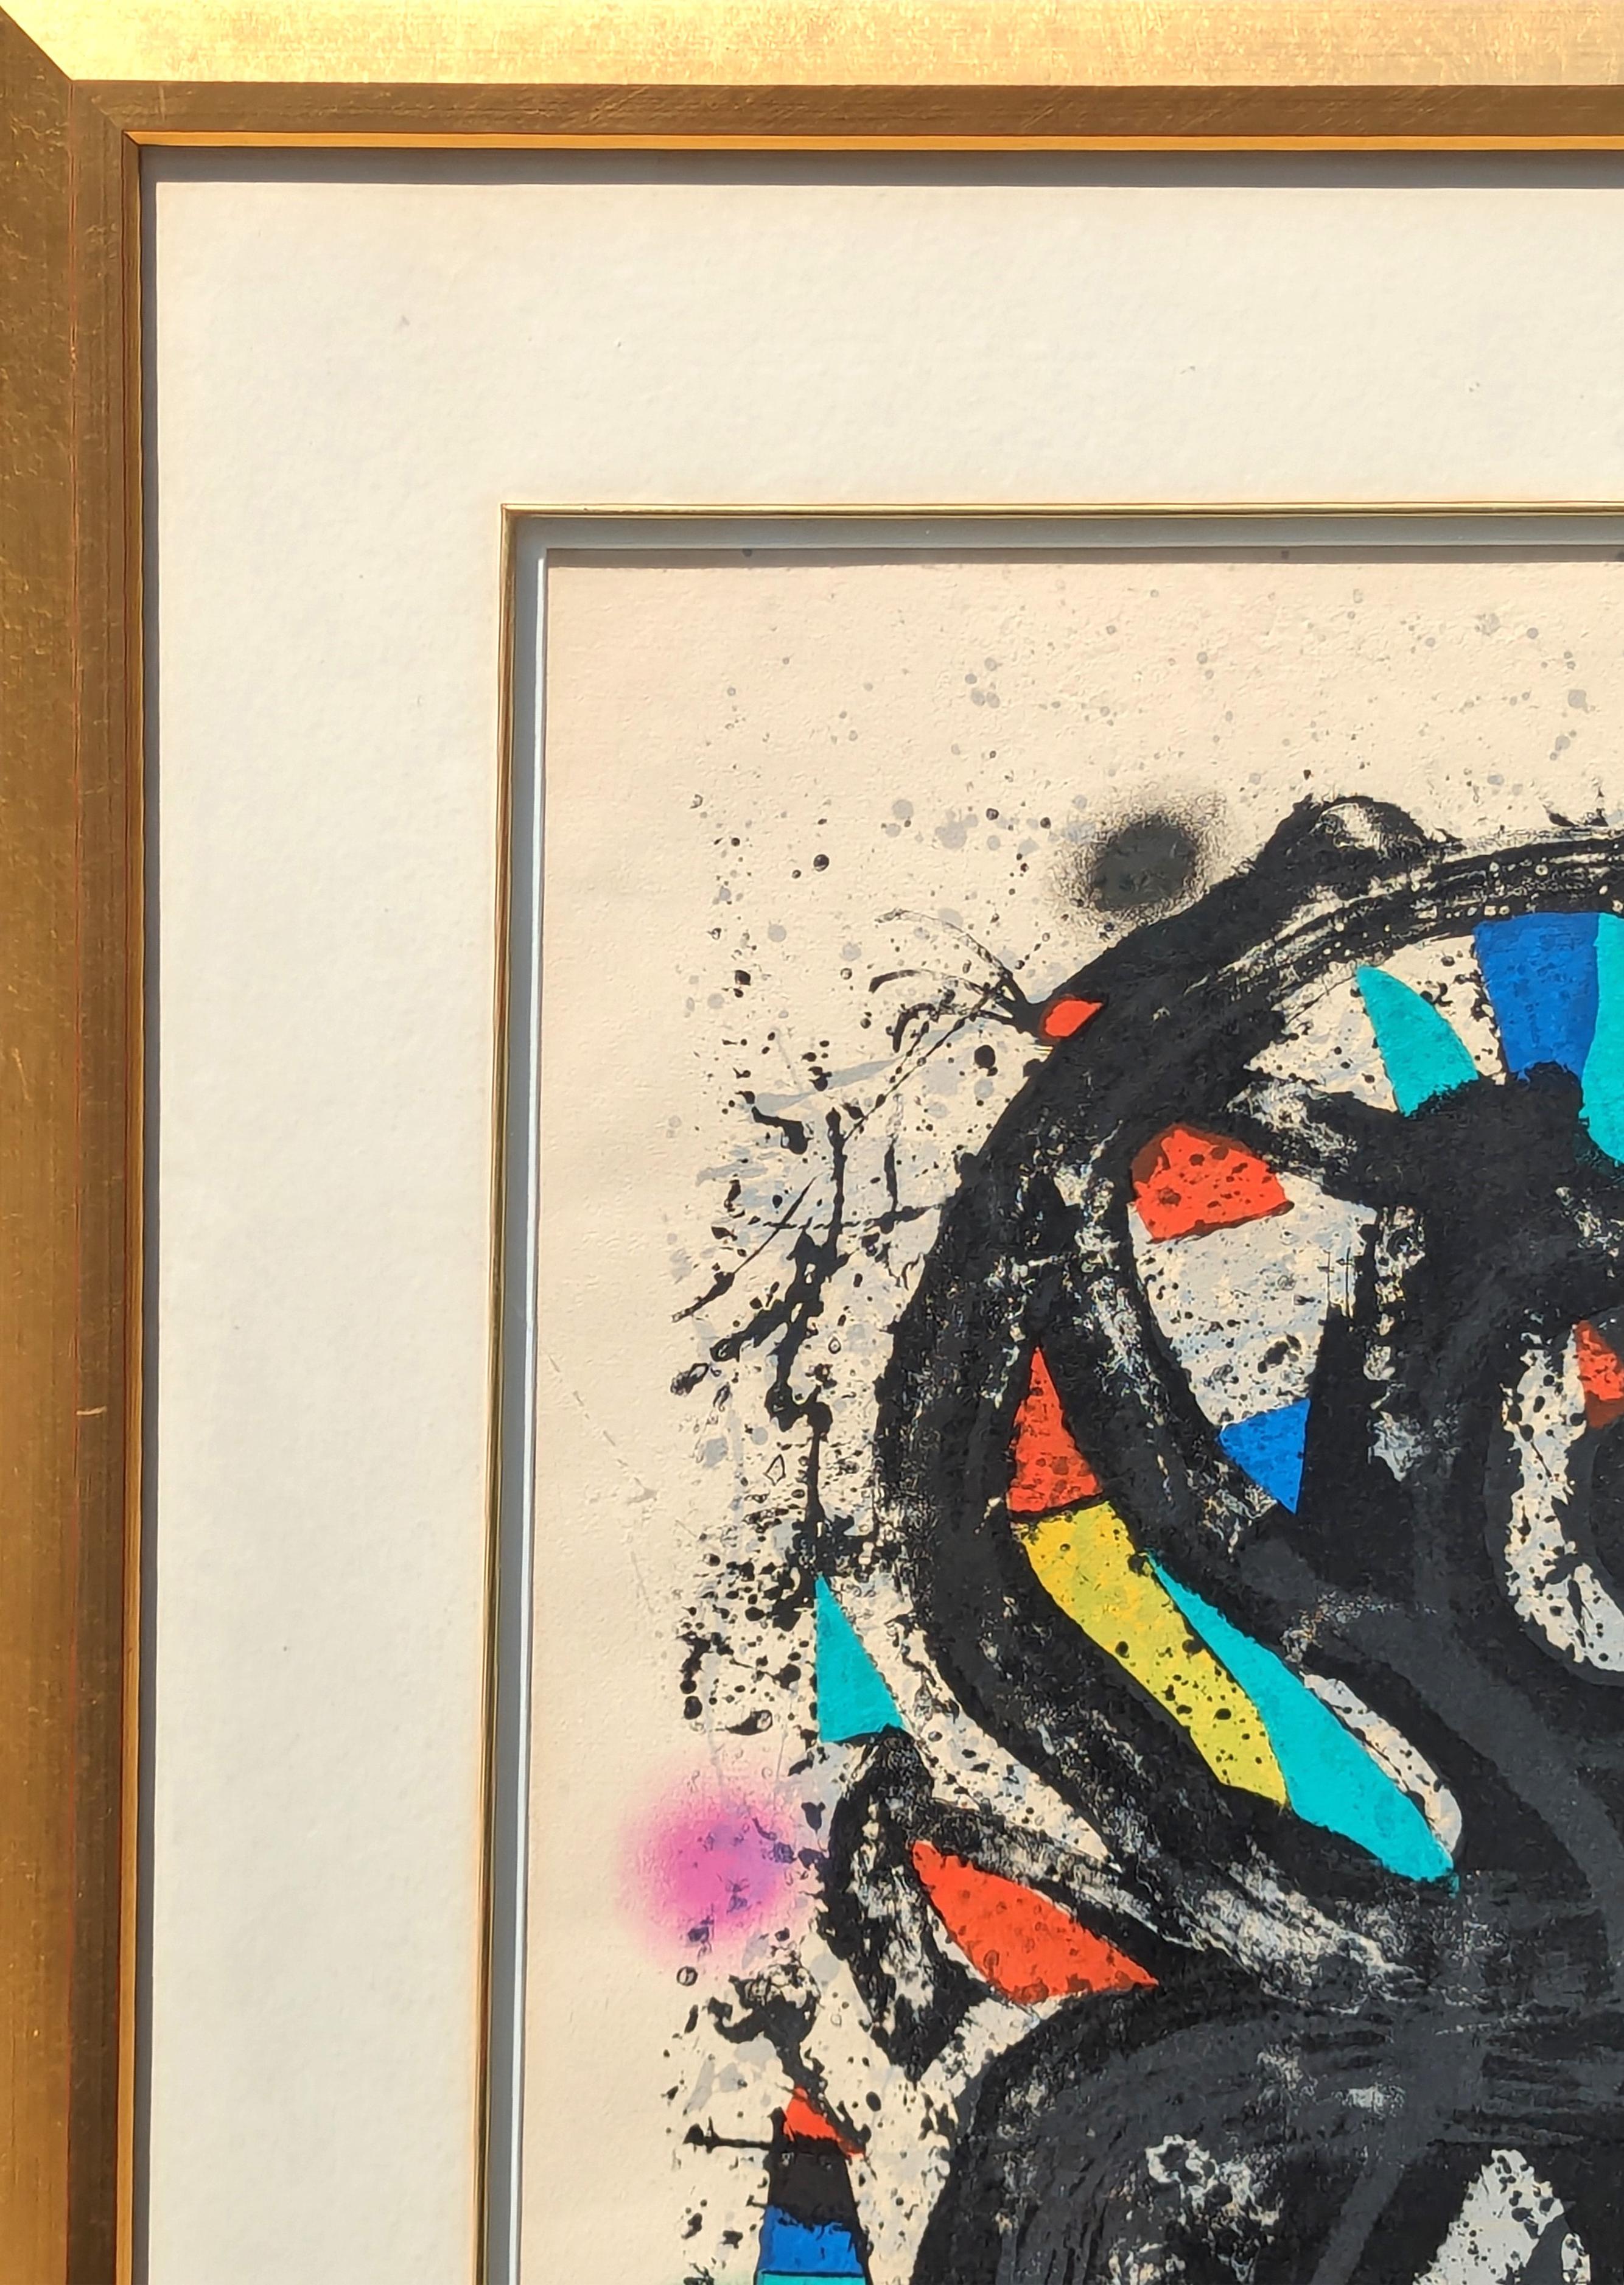 Modern colorful abstract lithograph by famous Surrealist artist Joan Miro. The work was created in conjunction with an exhibition that he had at the Grand Palais in Paris, France in 1974. Signed and editioned 36/50 in pencil along the front lower